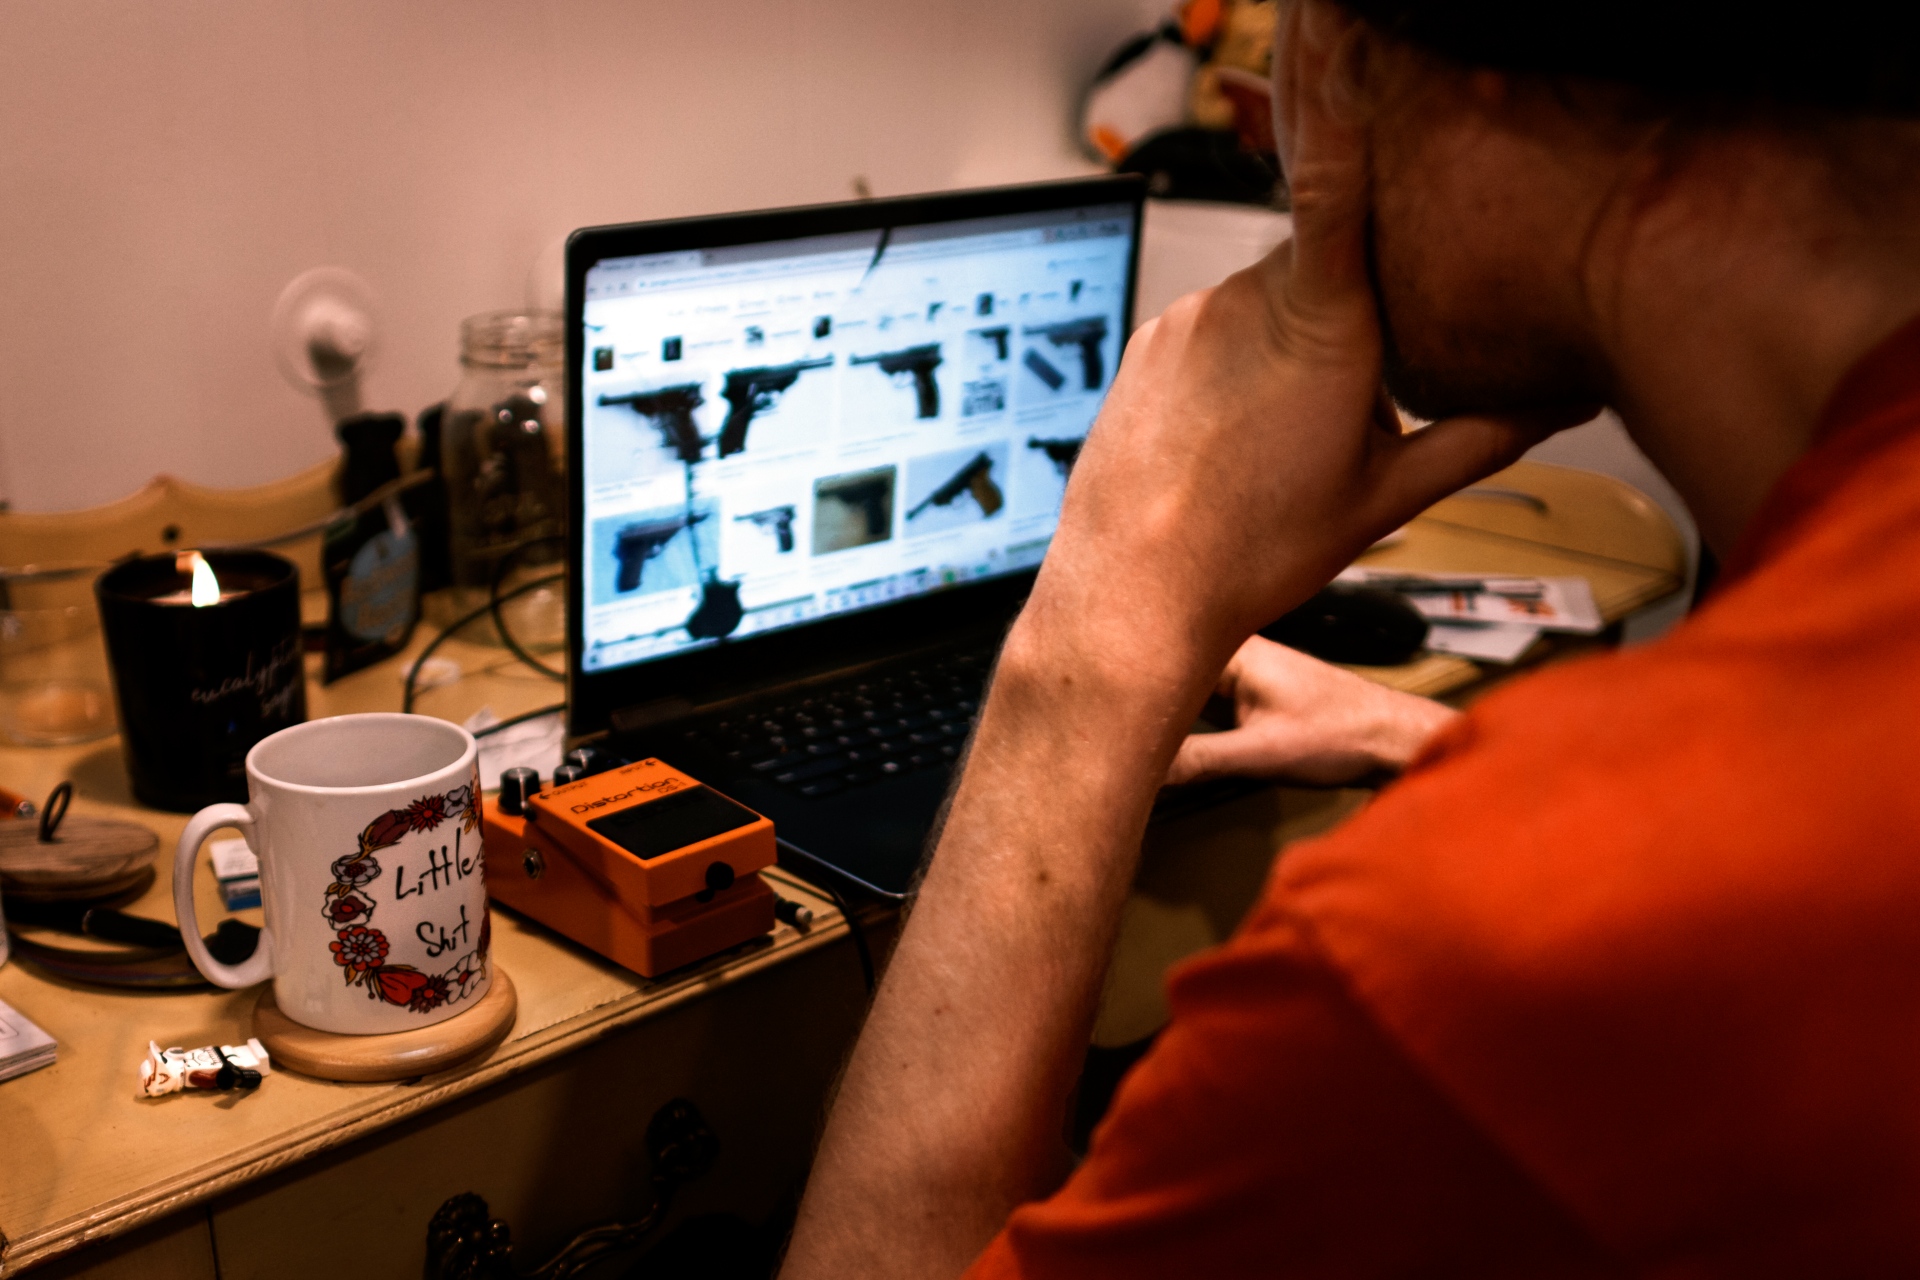 Max looking at a laptop with photos of handguns visible on the screen